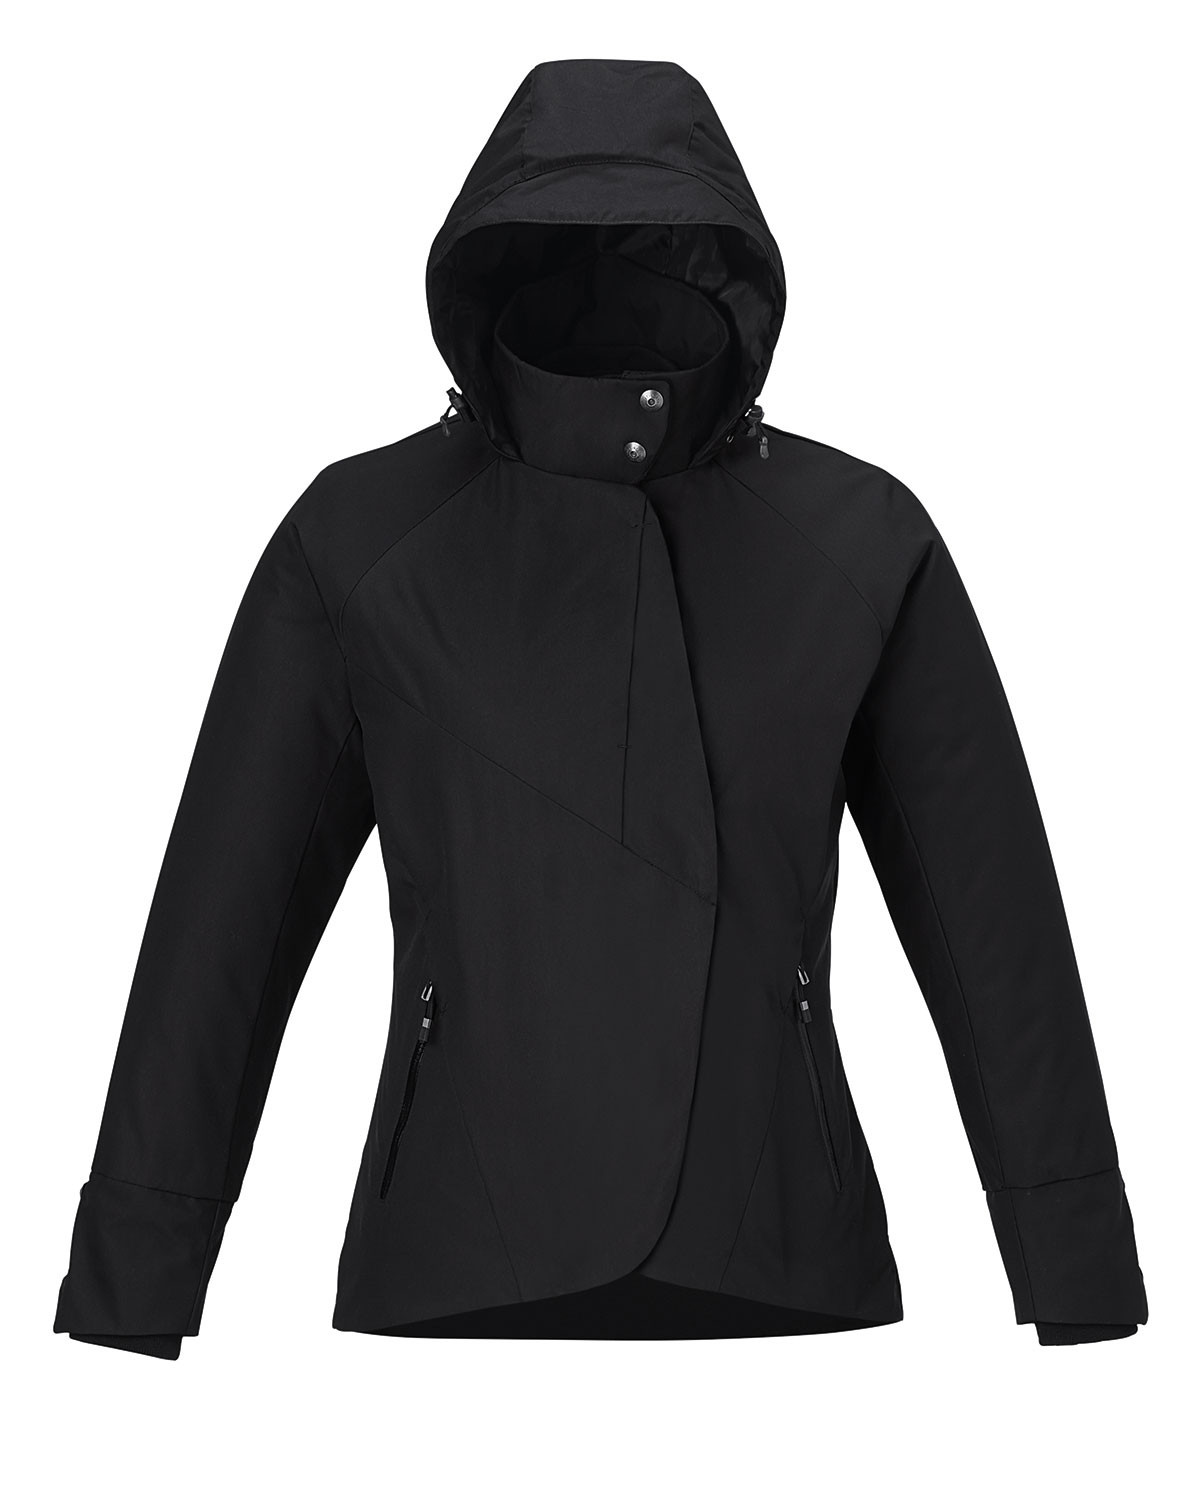 Ash City Insulated 78685 - Skyline Ladies' City Twill Insulated Jacket With Heat Reflect Technology